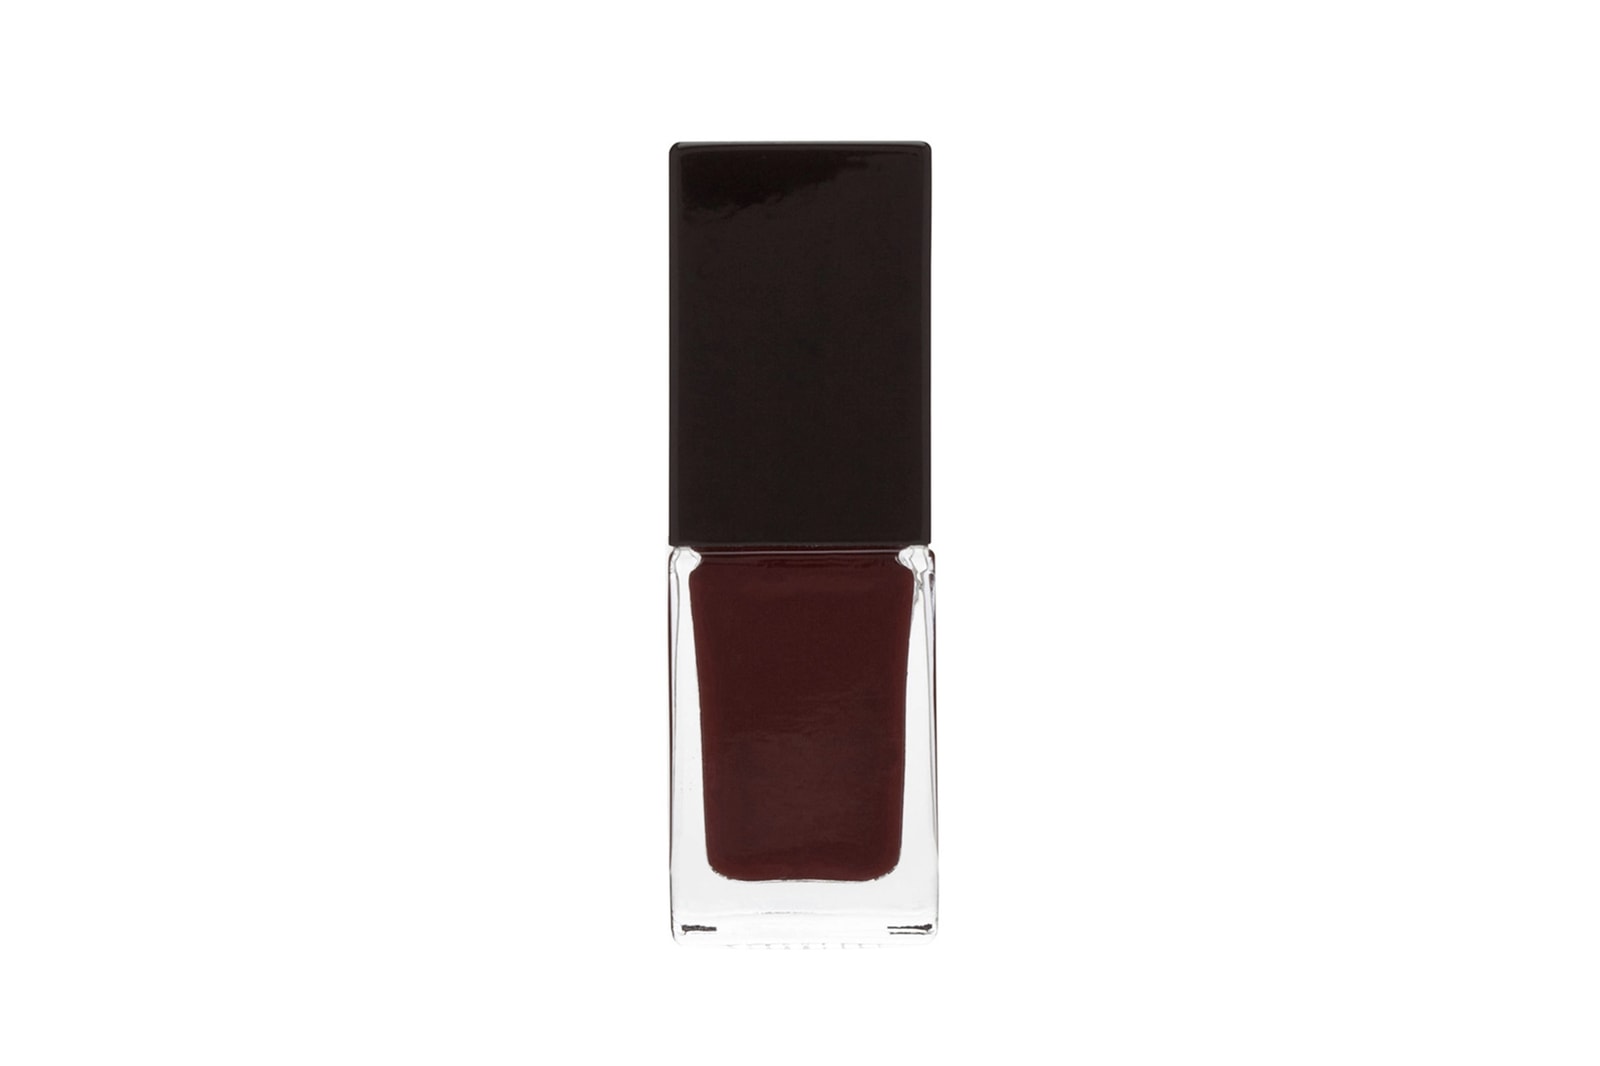 Best Red Nail Polish Colors For Fall Season Chanel OPI Christian Louboutin Tom Ford Beauty Makeup Nails